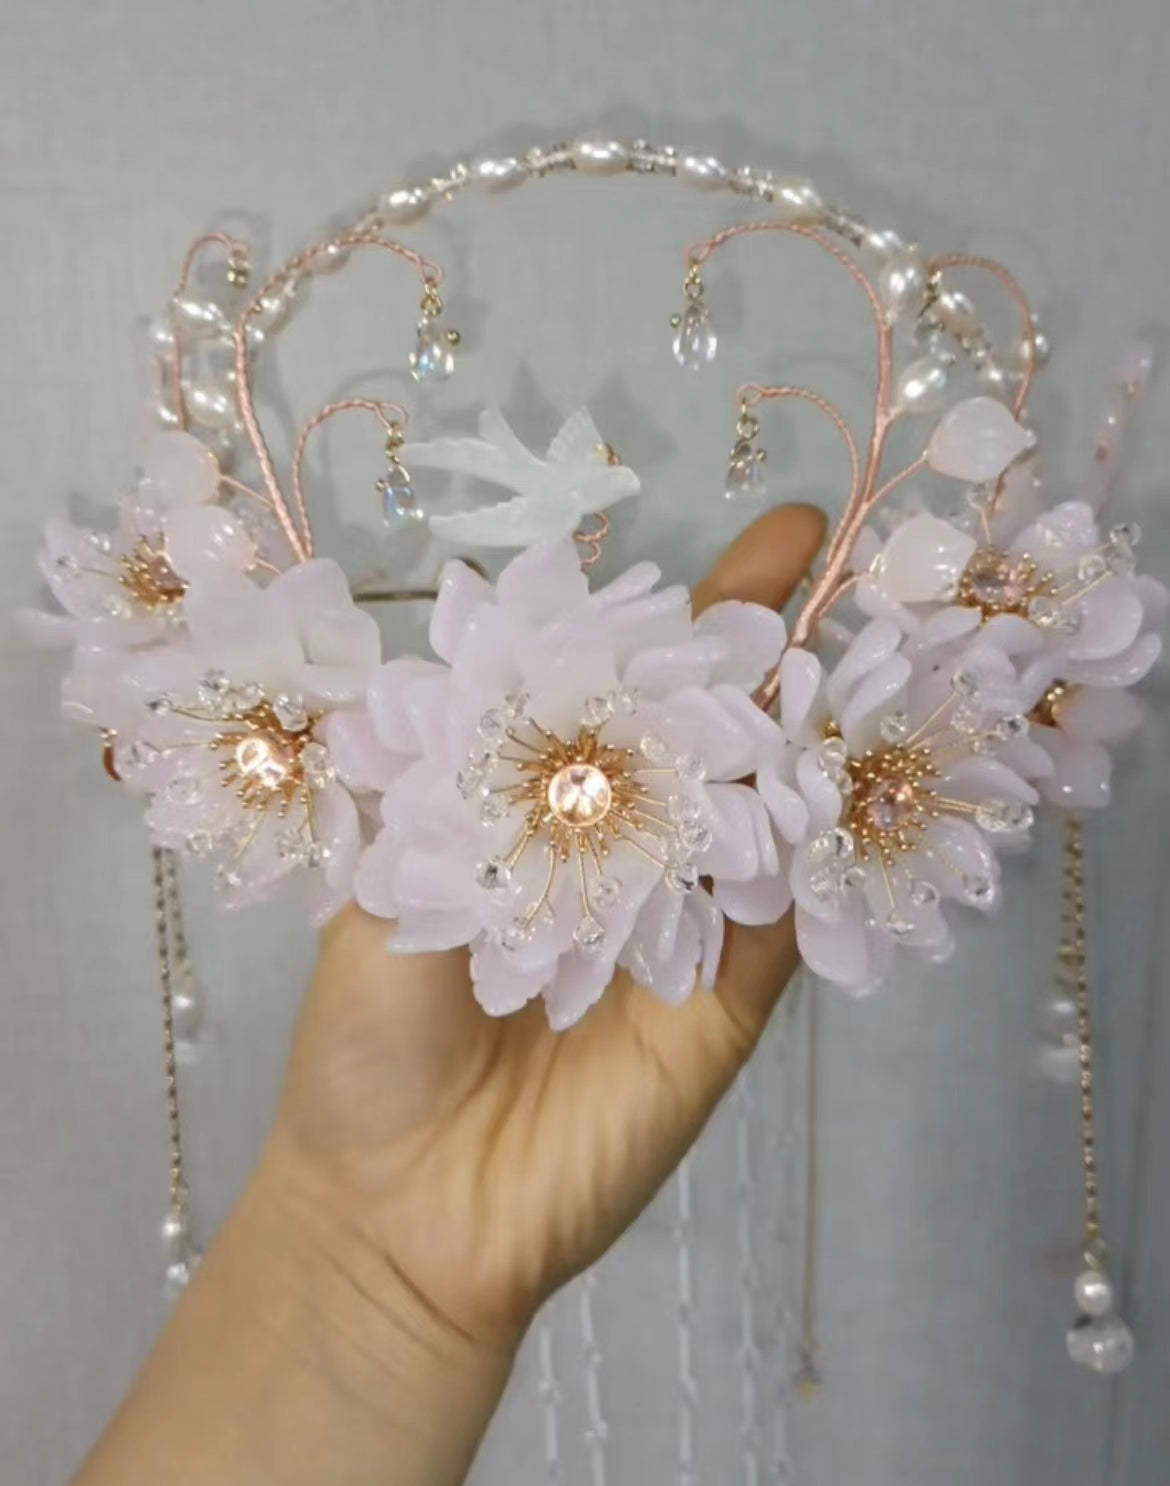 Handmade wreath garland DIY flower hair products custom gift personalized accessories